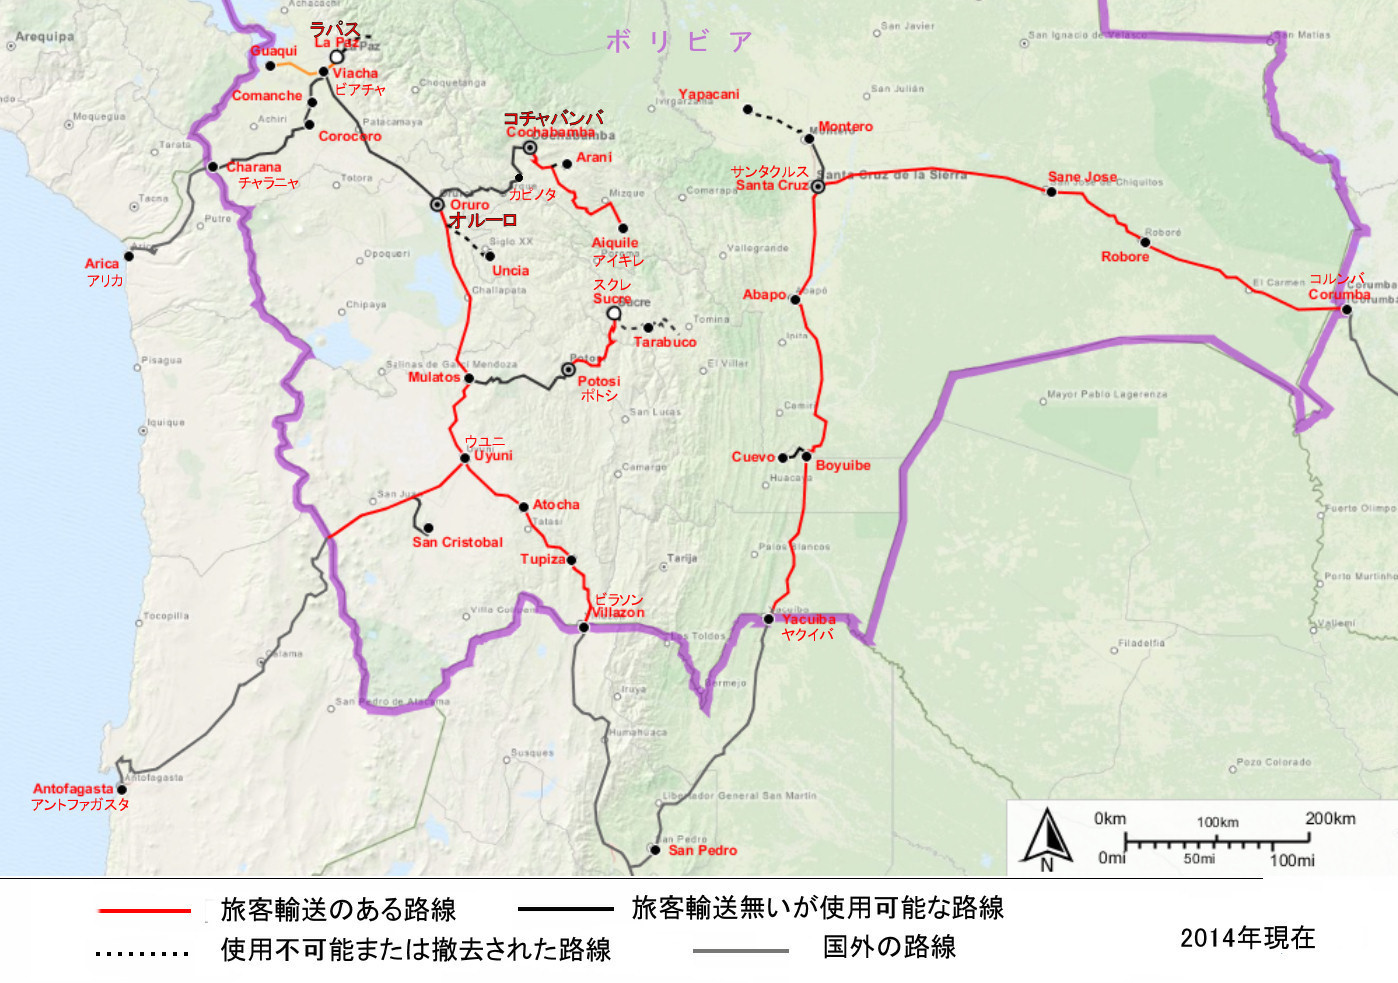 Map of Bolivia's rail network